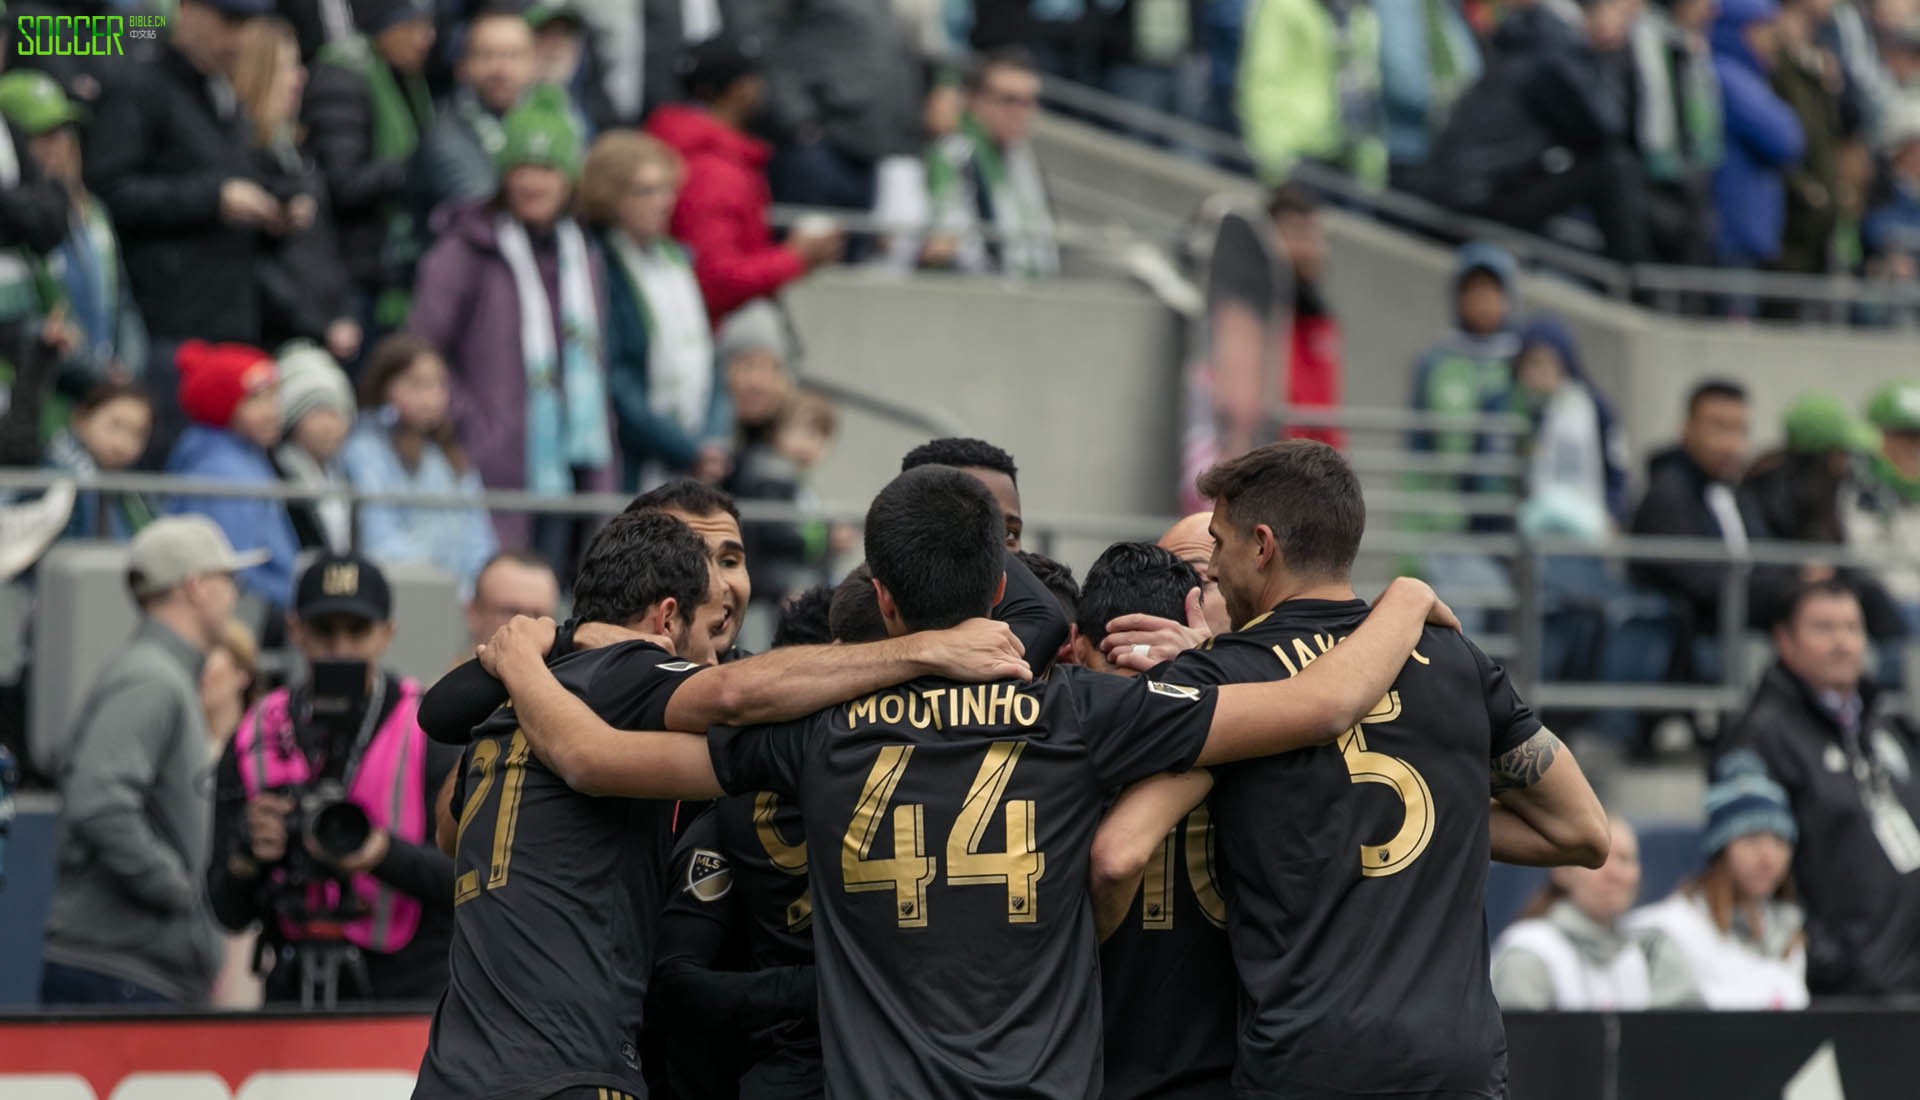 lafc-first-win-soccerbible_0002_594a7358